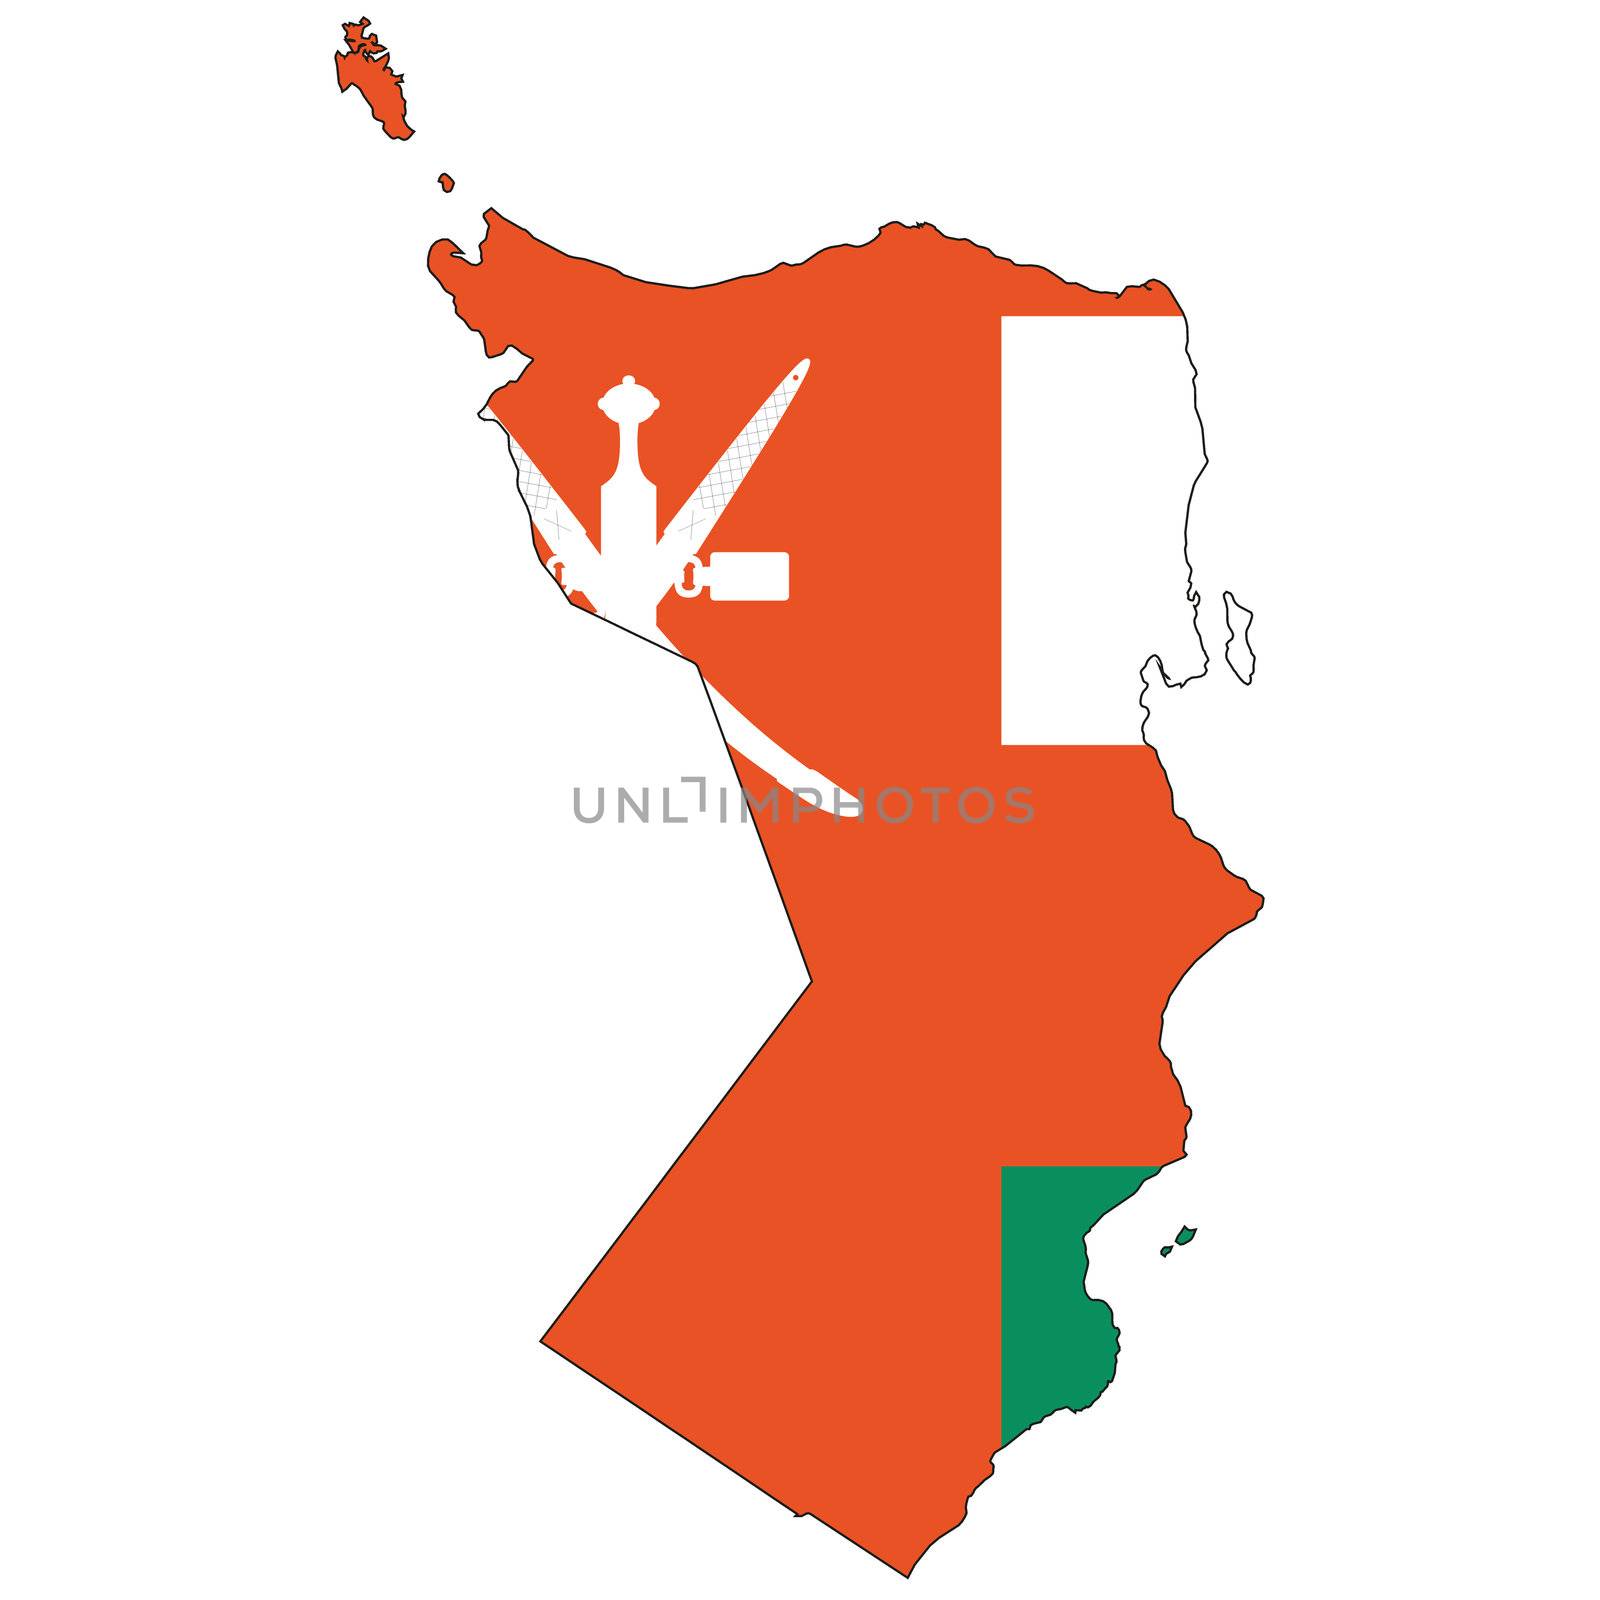 Country outline with the flag of Oman in it